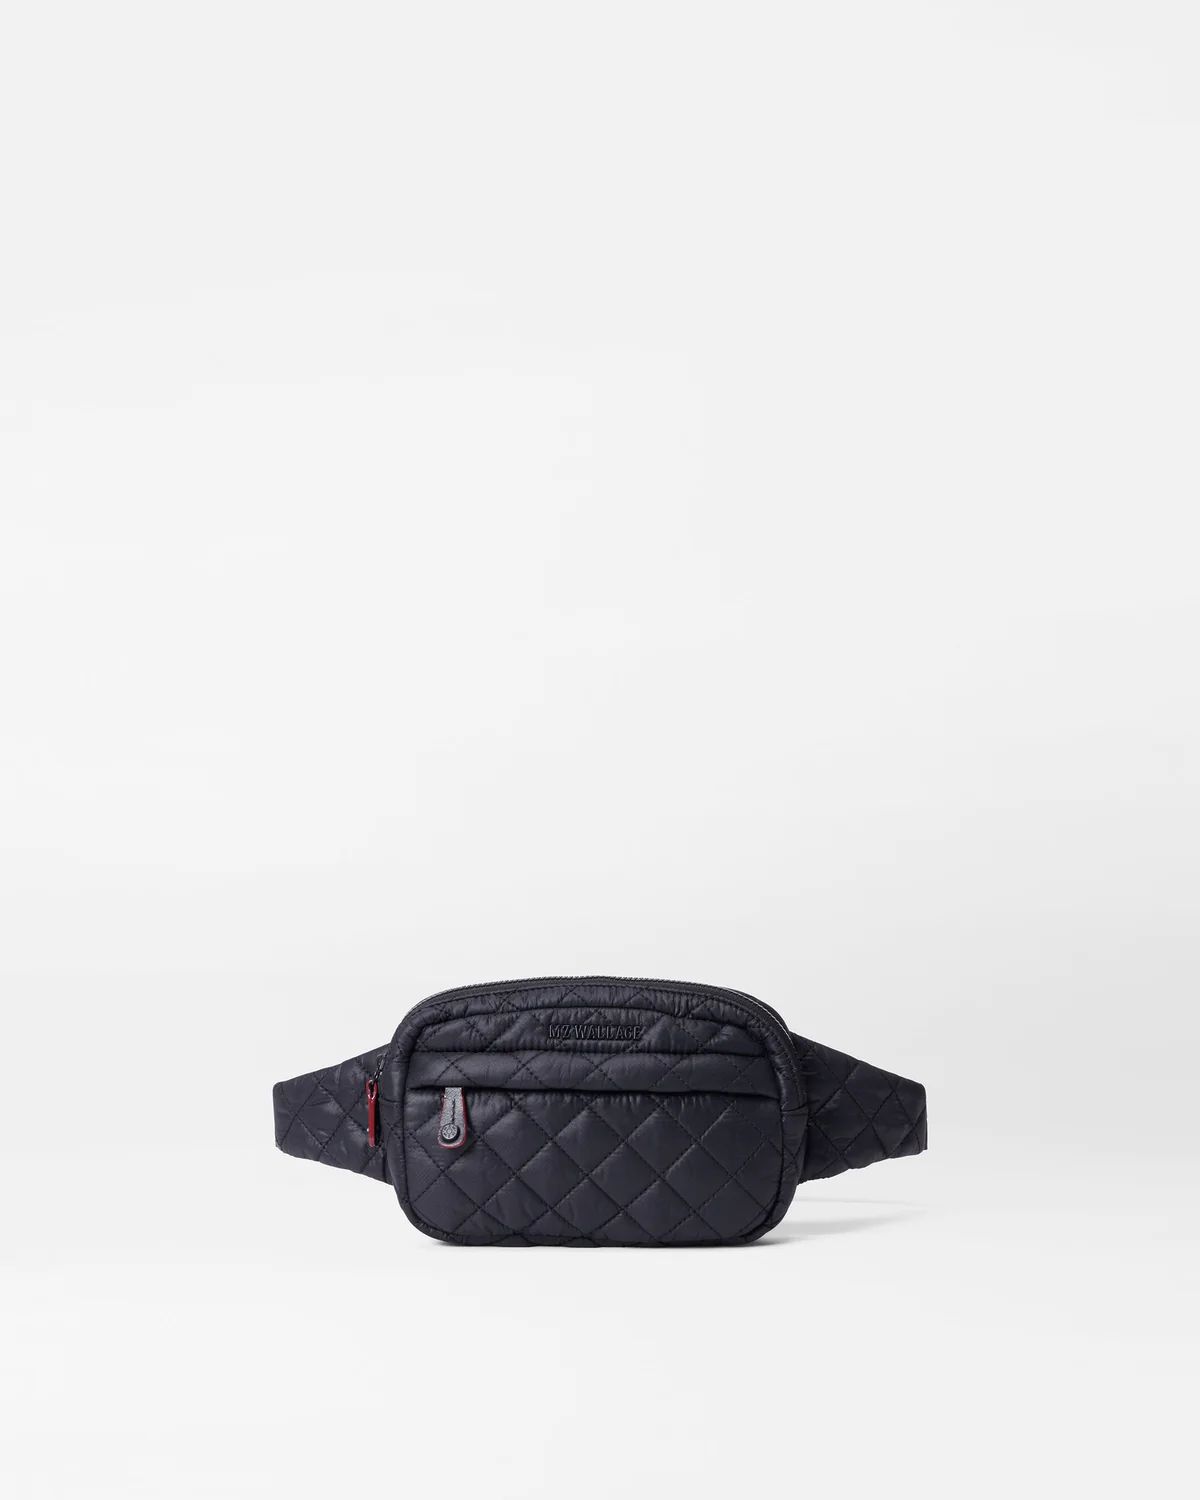 MZ Wallace Quilted Black Metro Belt Bag | MZ Wallace